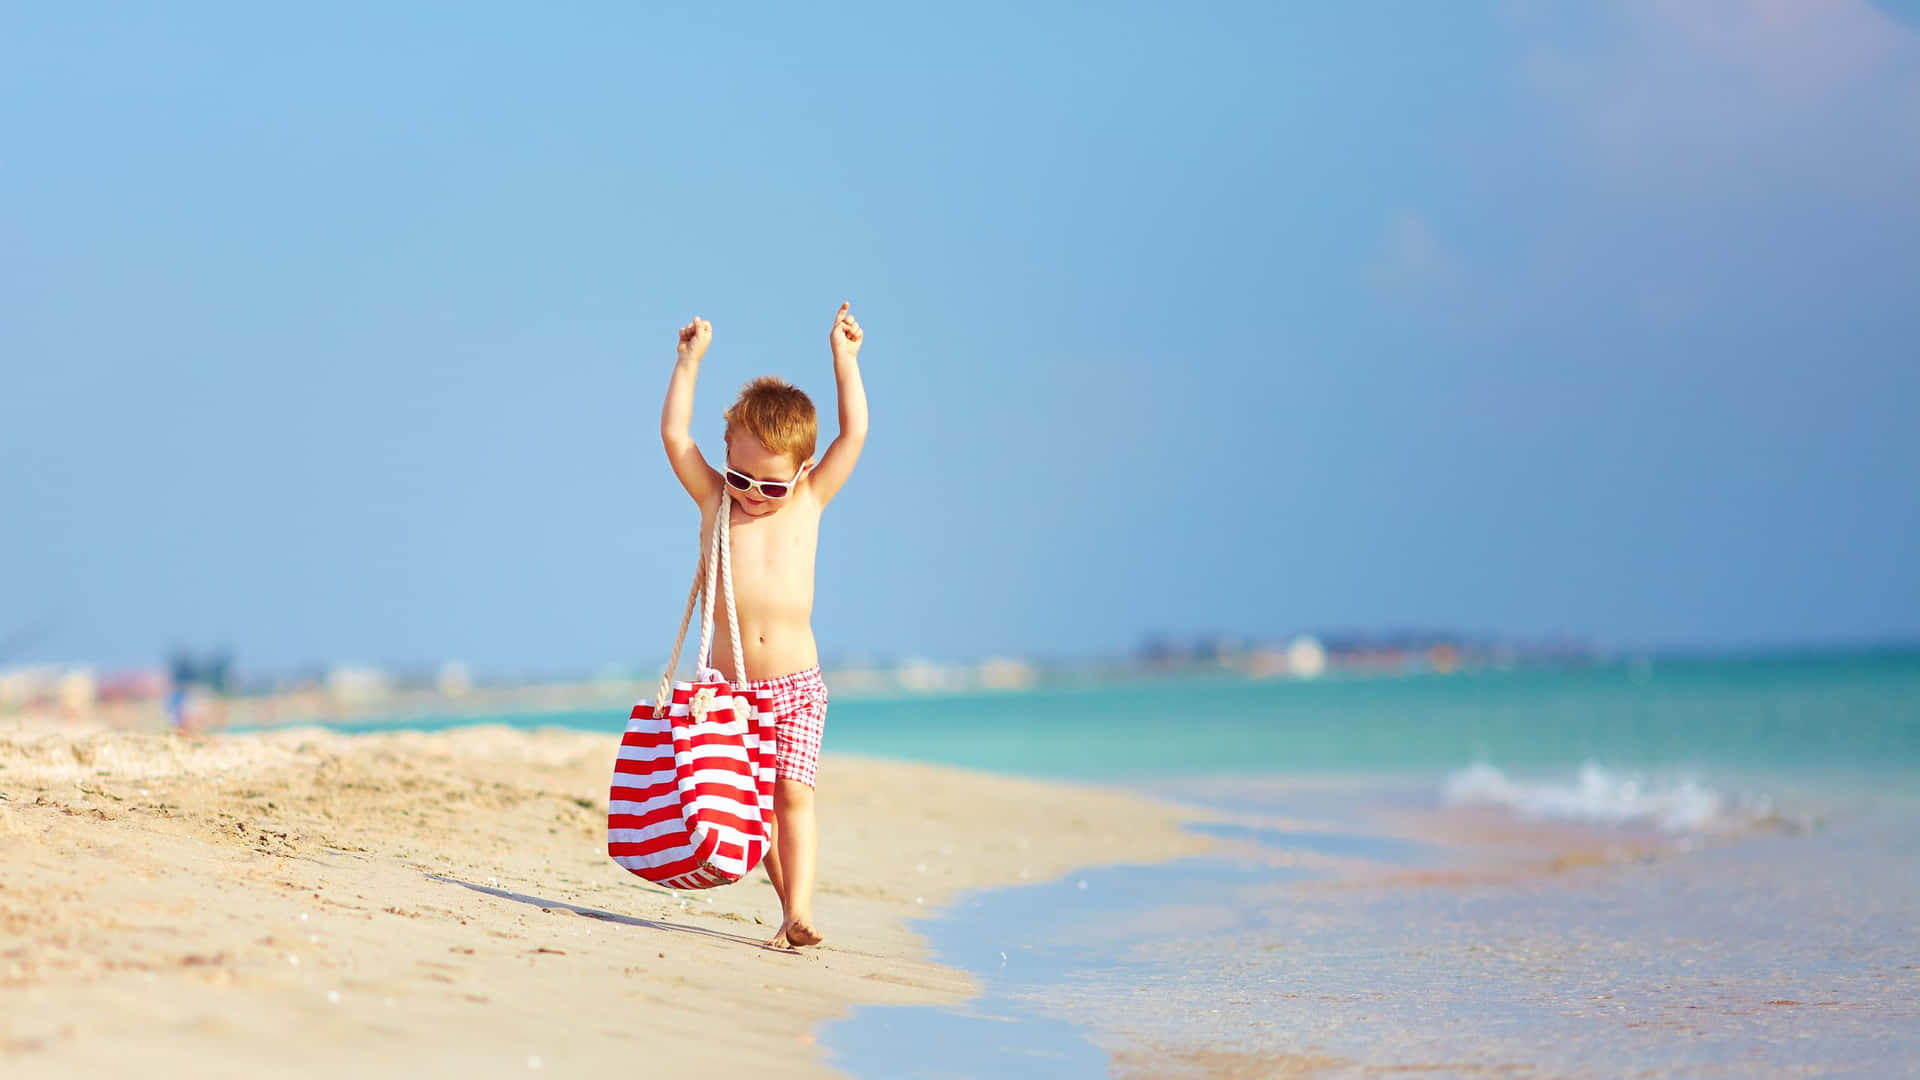 Stylish Boy Enjoying a Day at the Beach in a Trendy Summer Outfit Wallpaper